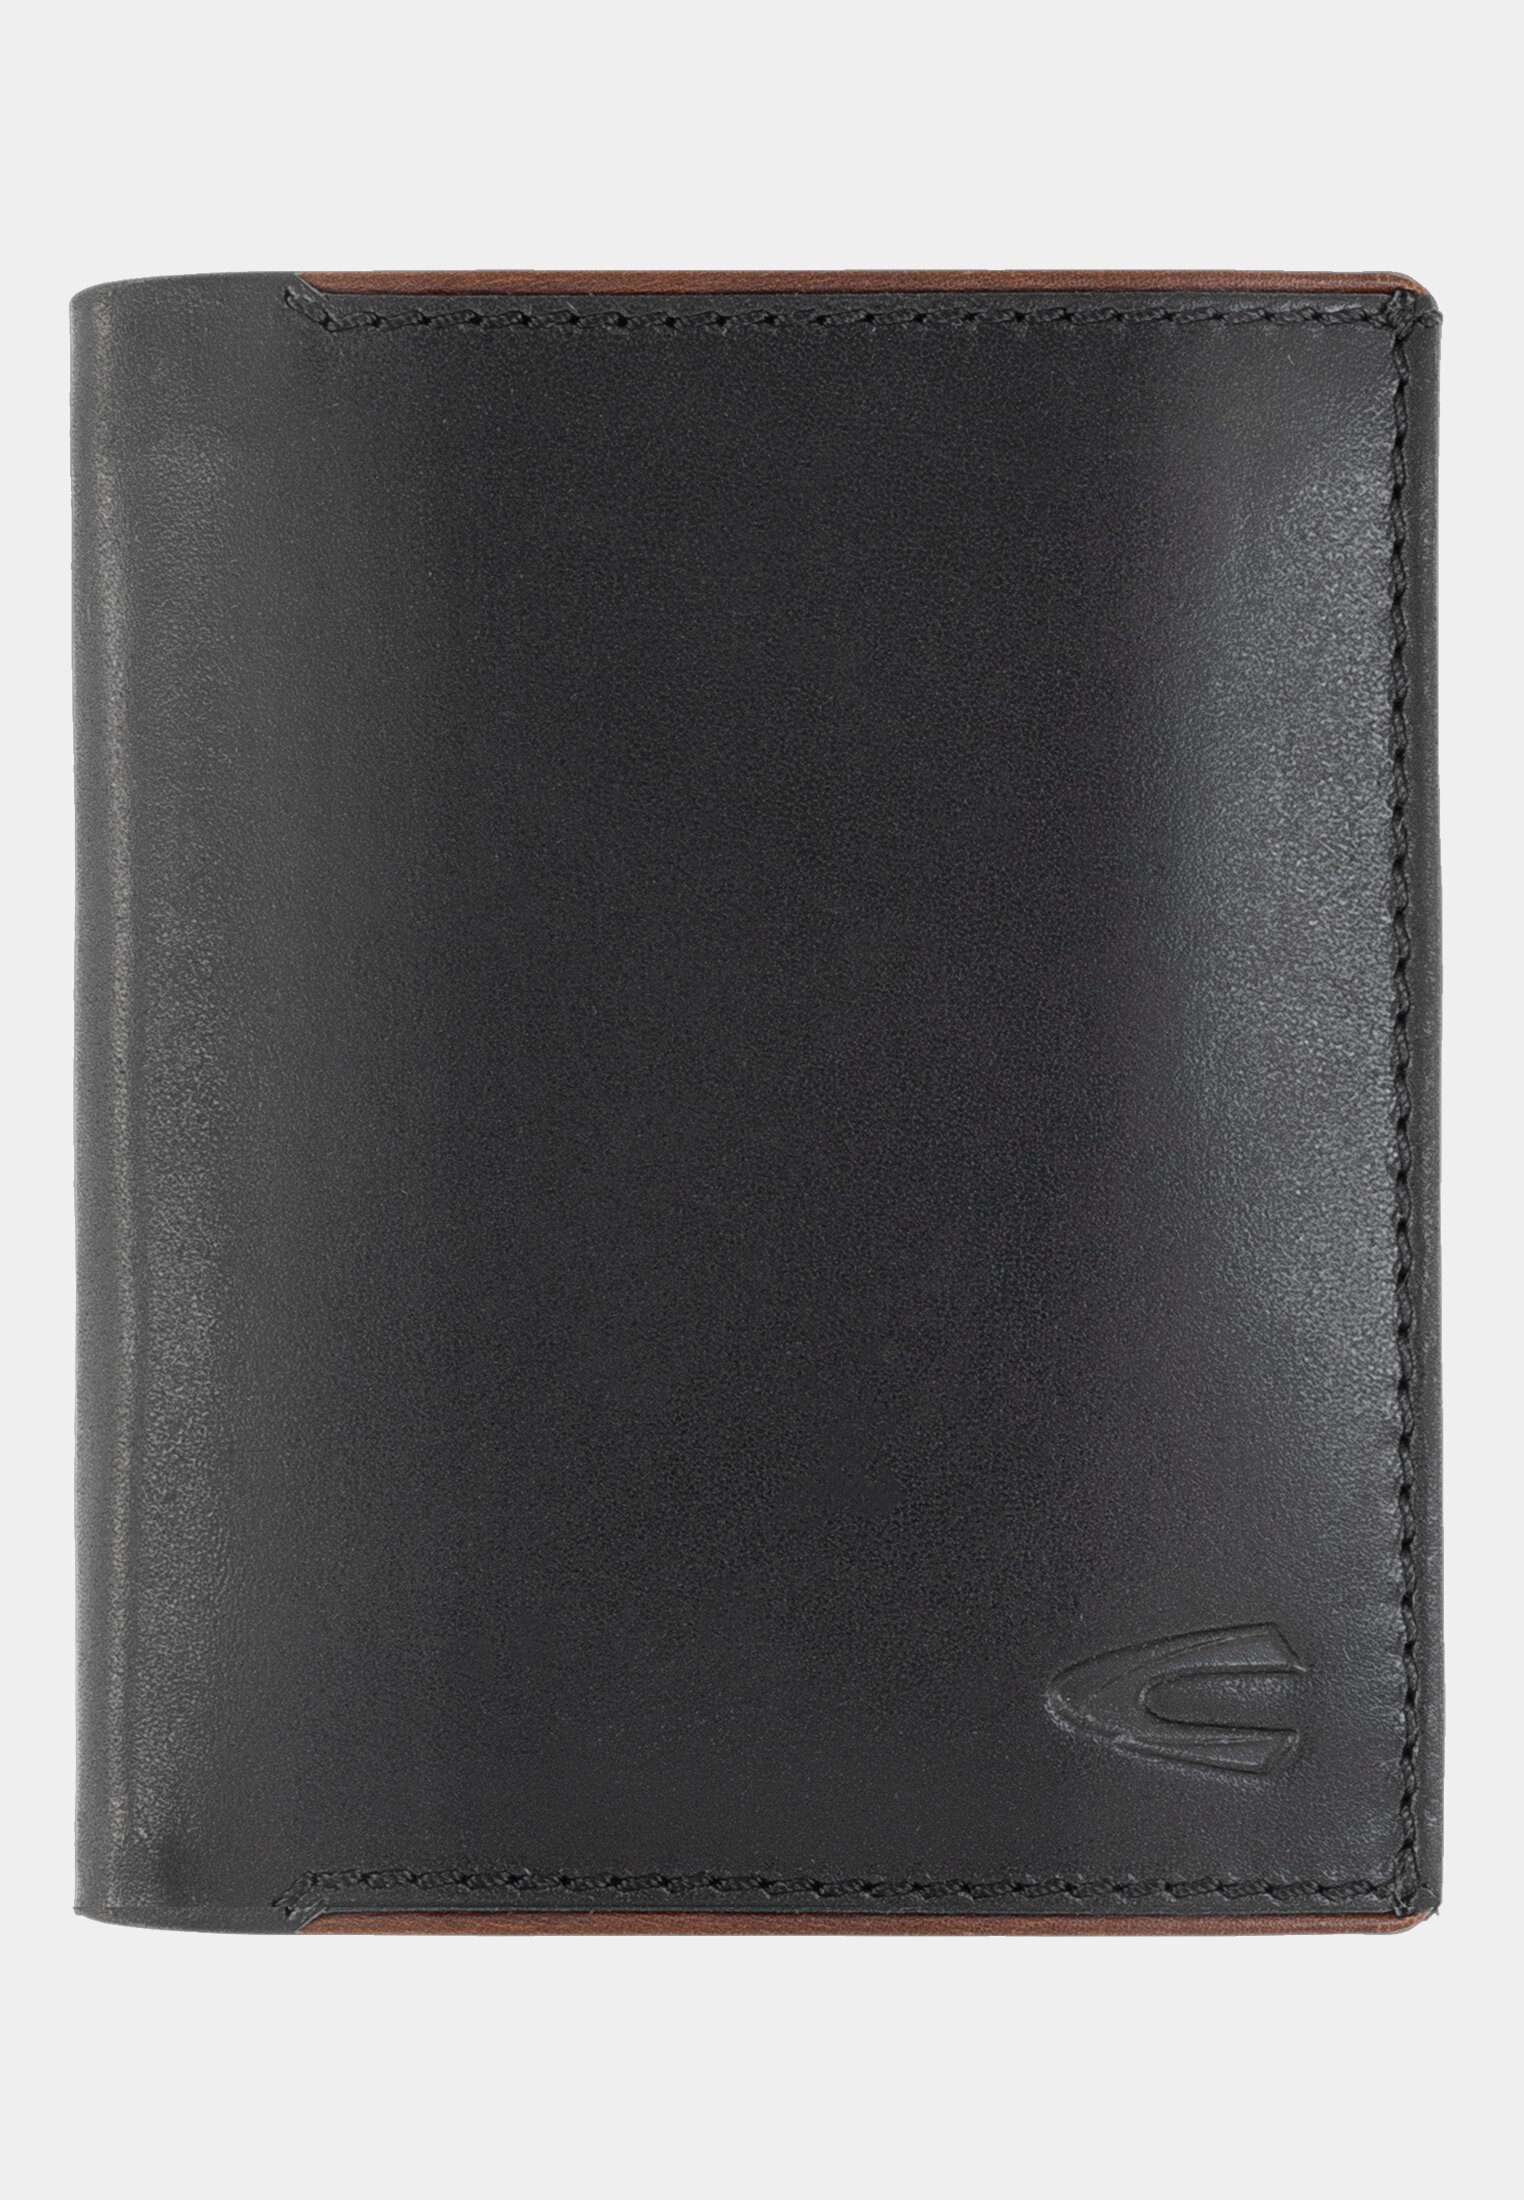 Camel Active Wallet made from genius leather